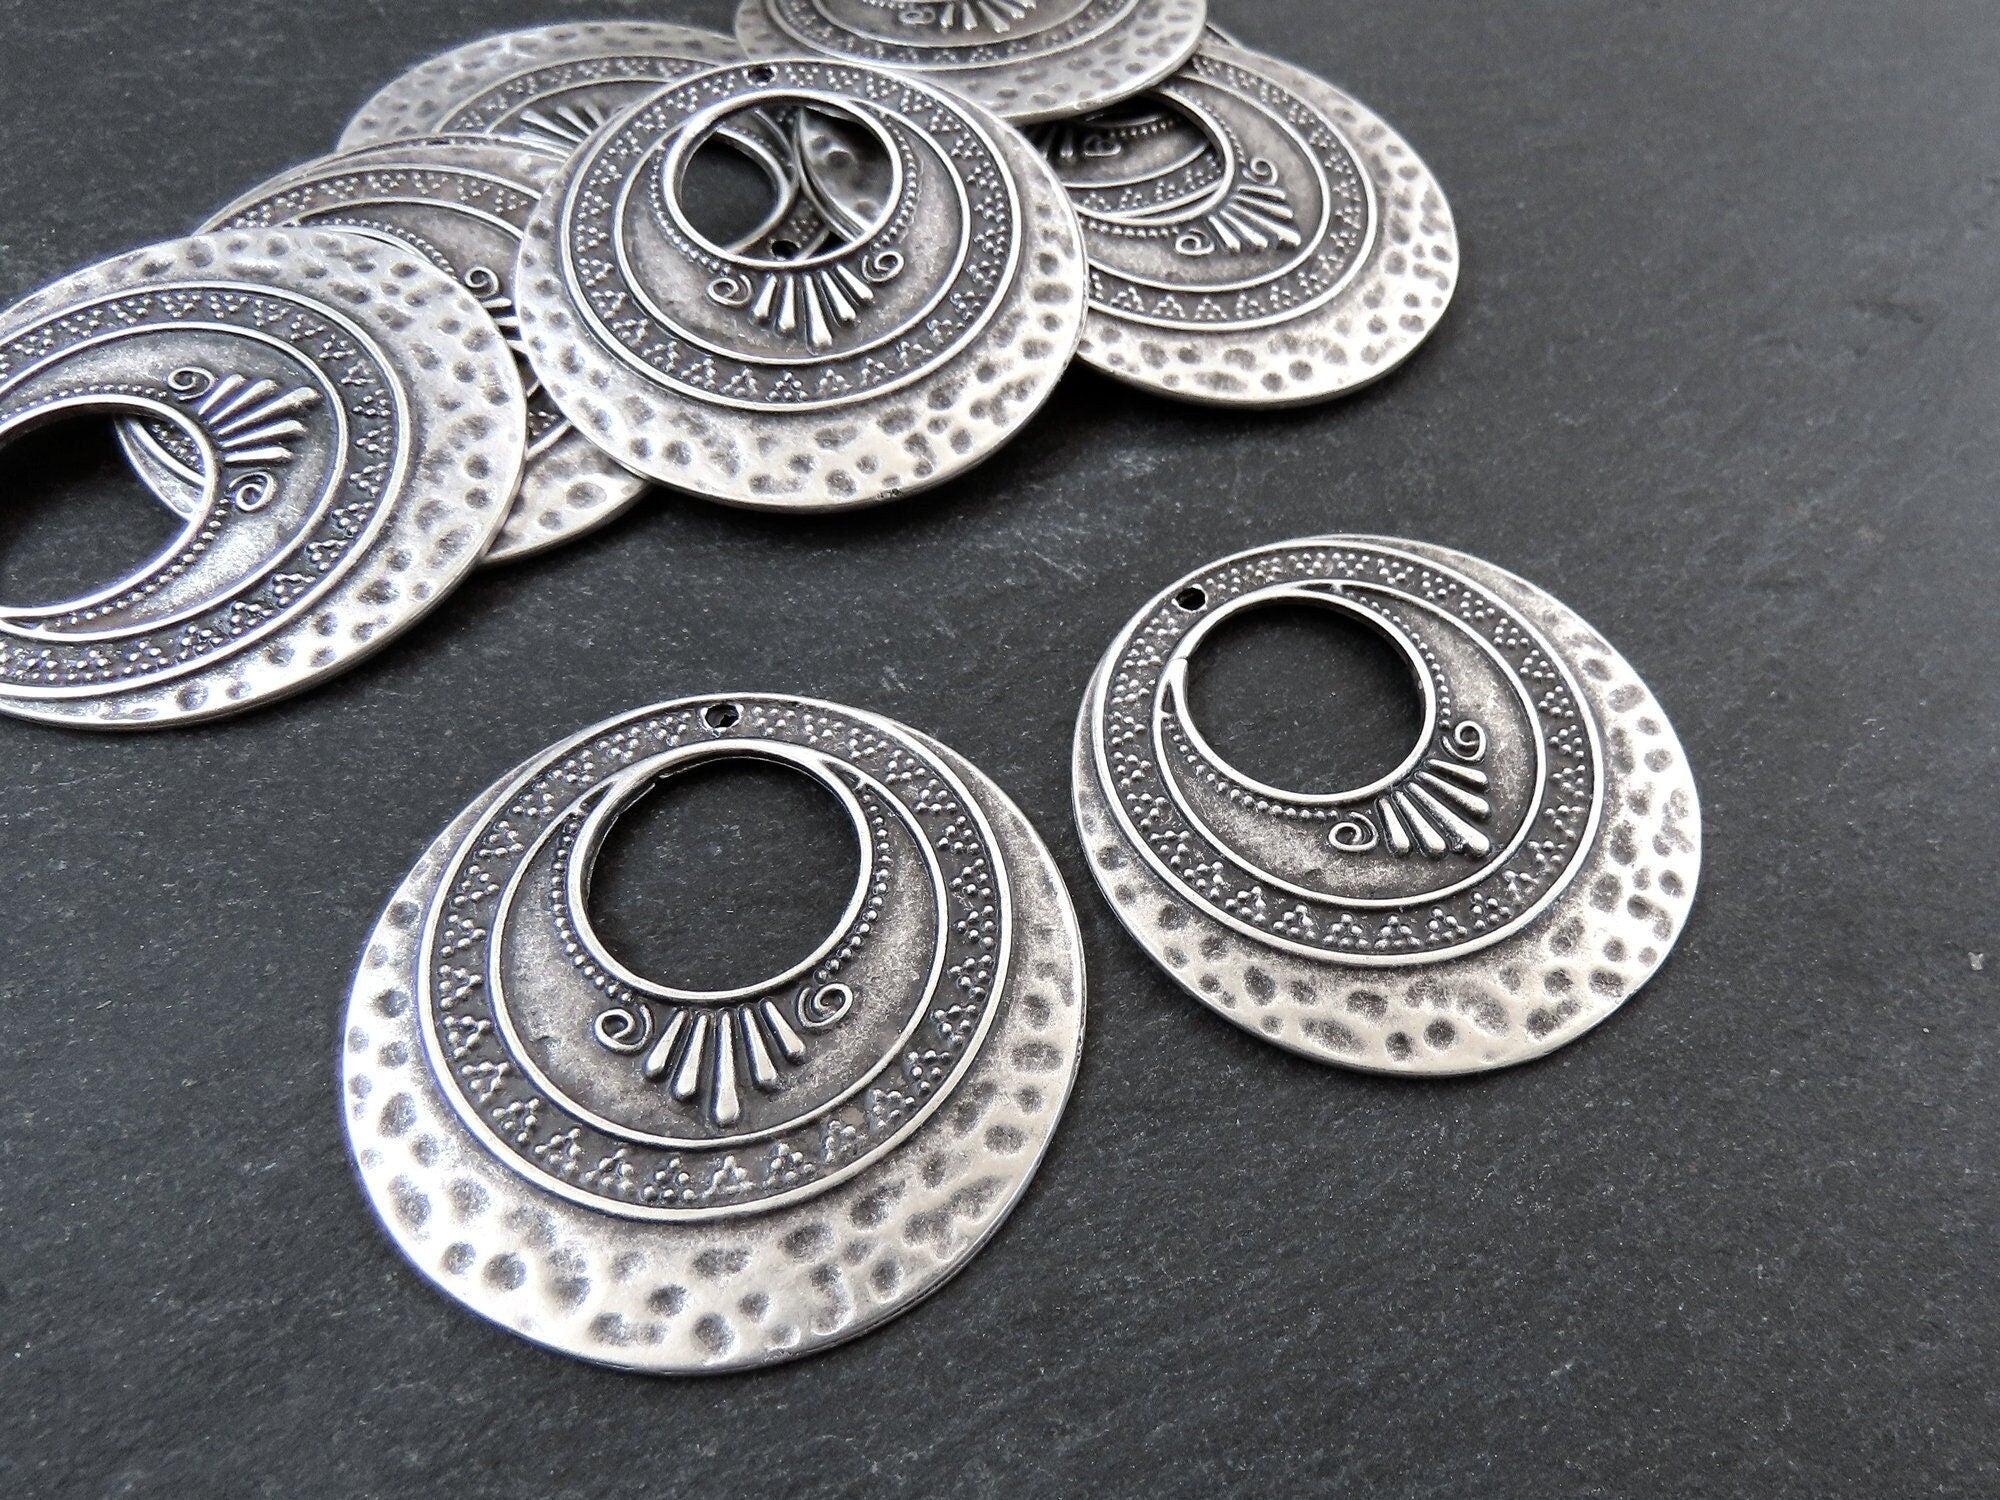 2 Large Round Art Deco Circle Loop Pendants Boho Bohemain Gypsy Jewelry Supplies Craft - Matte Antique Silver Plated